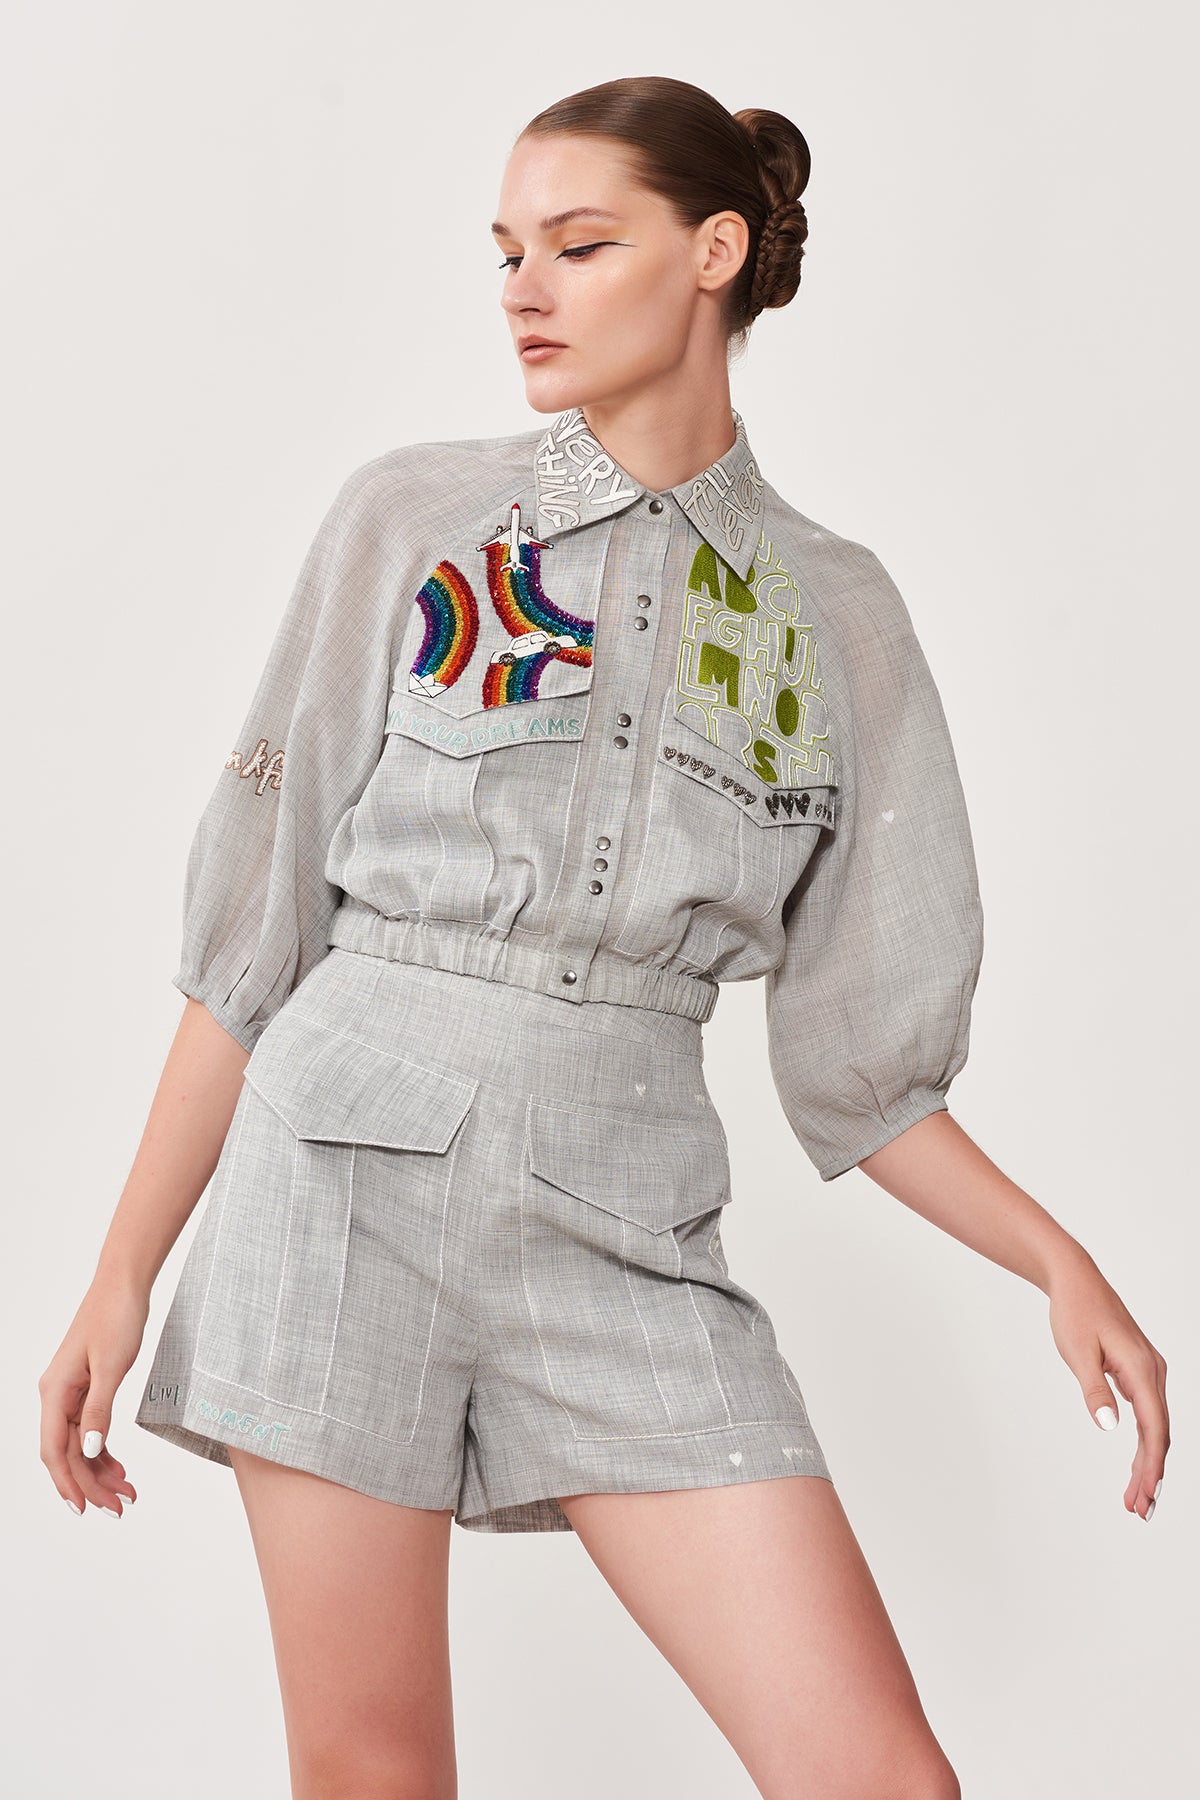 Shorts Of (Own Your Dream Flap Short Jacket)